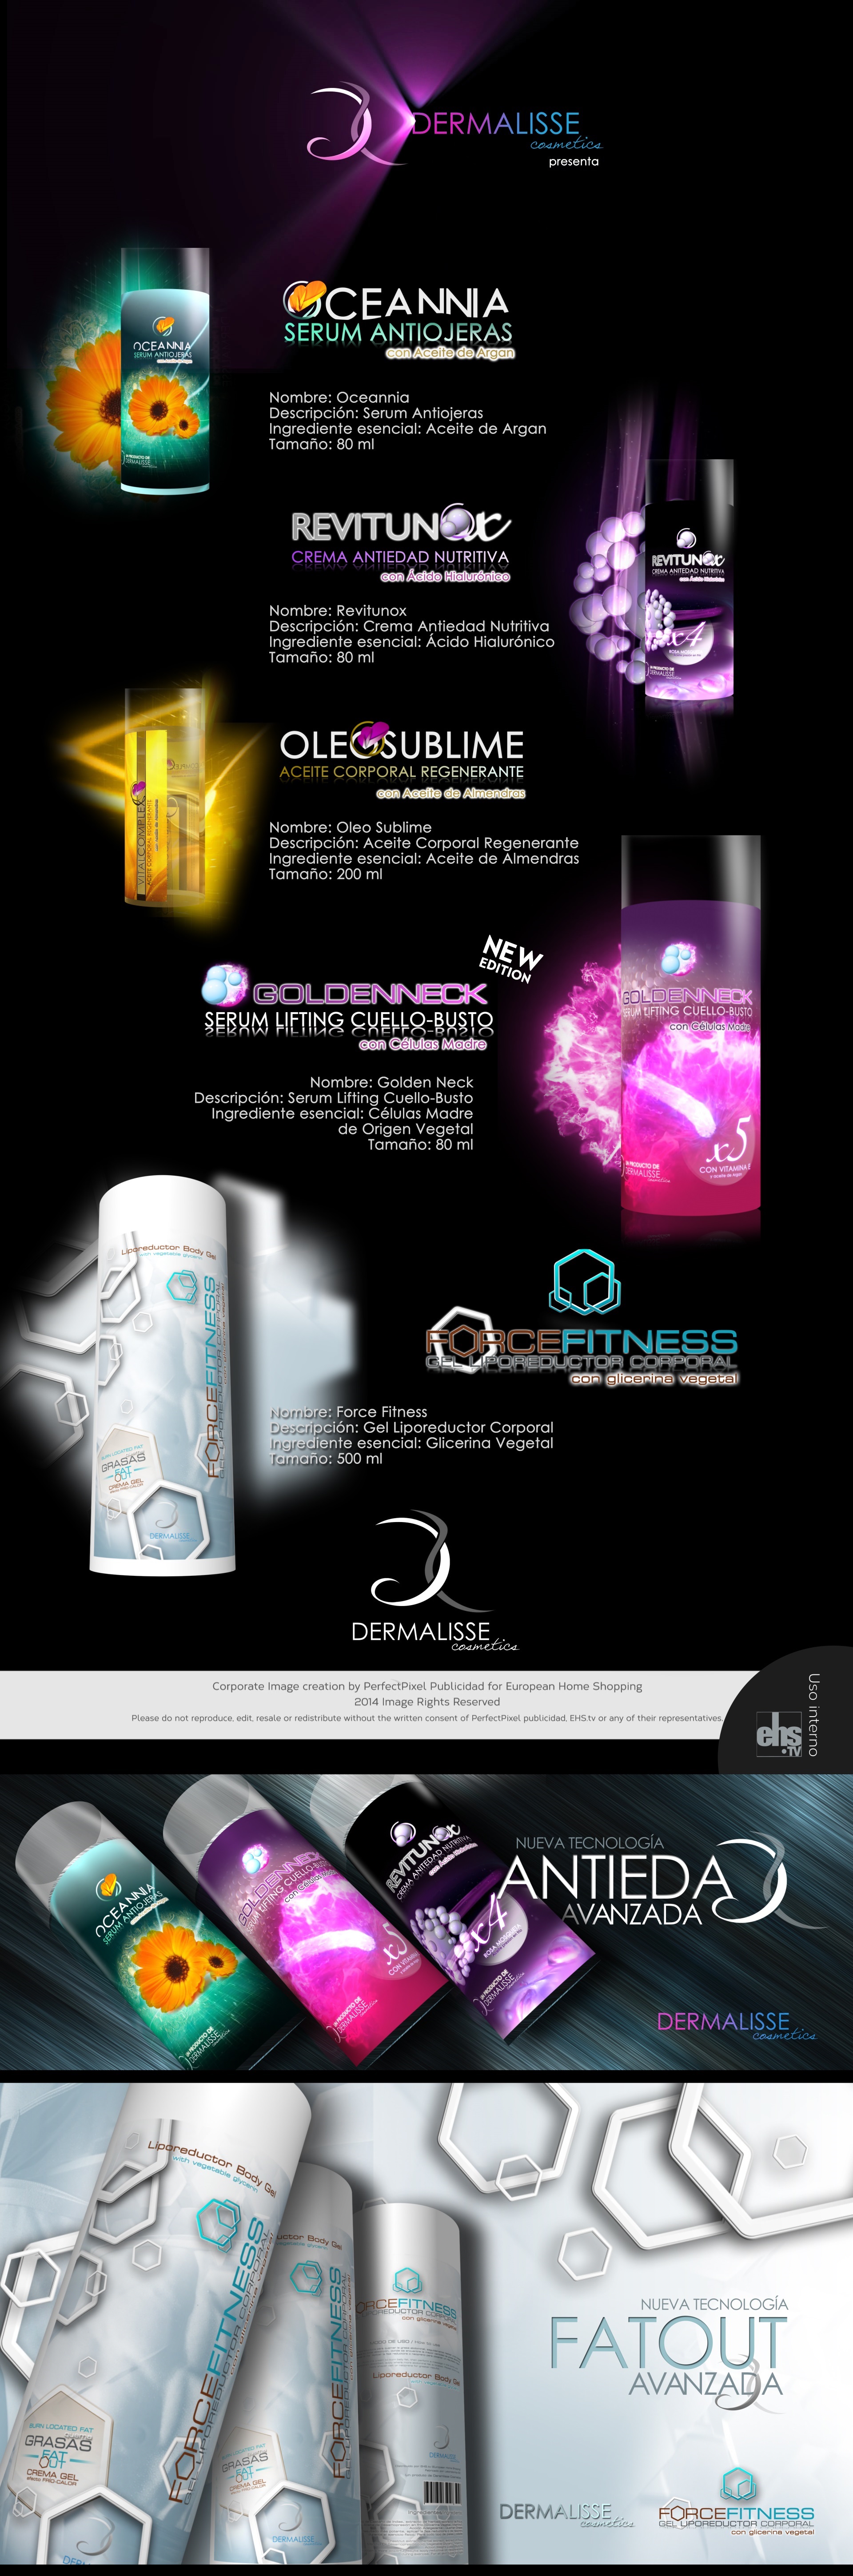 Dermalisse Cosmetics Brand Image - Products Packaging Design